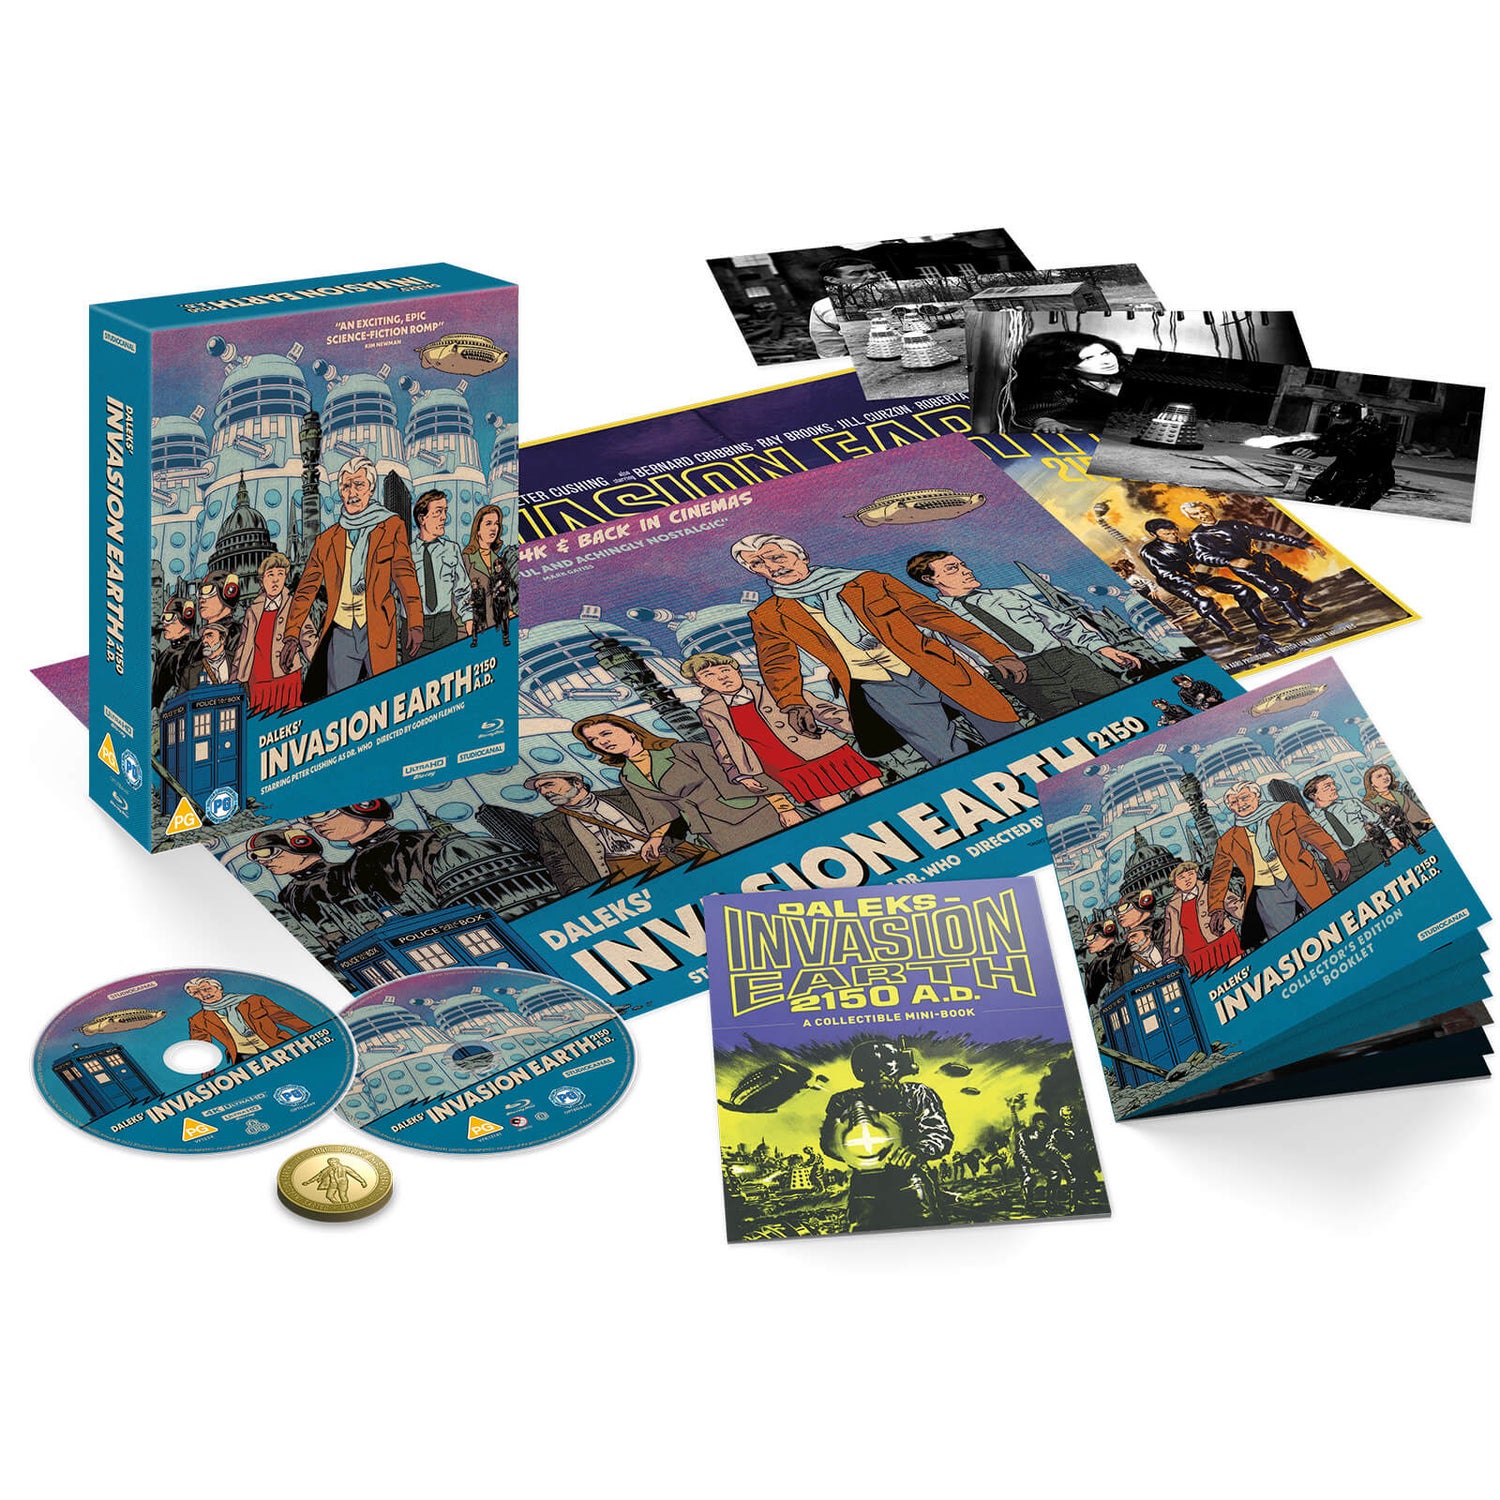 Daleks' Invasion Earth 2150 A.D. 4K Ultra HD Collector's Edition (includes Blu-ray)